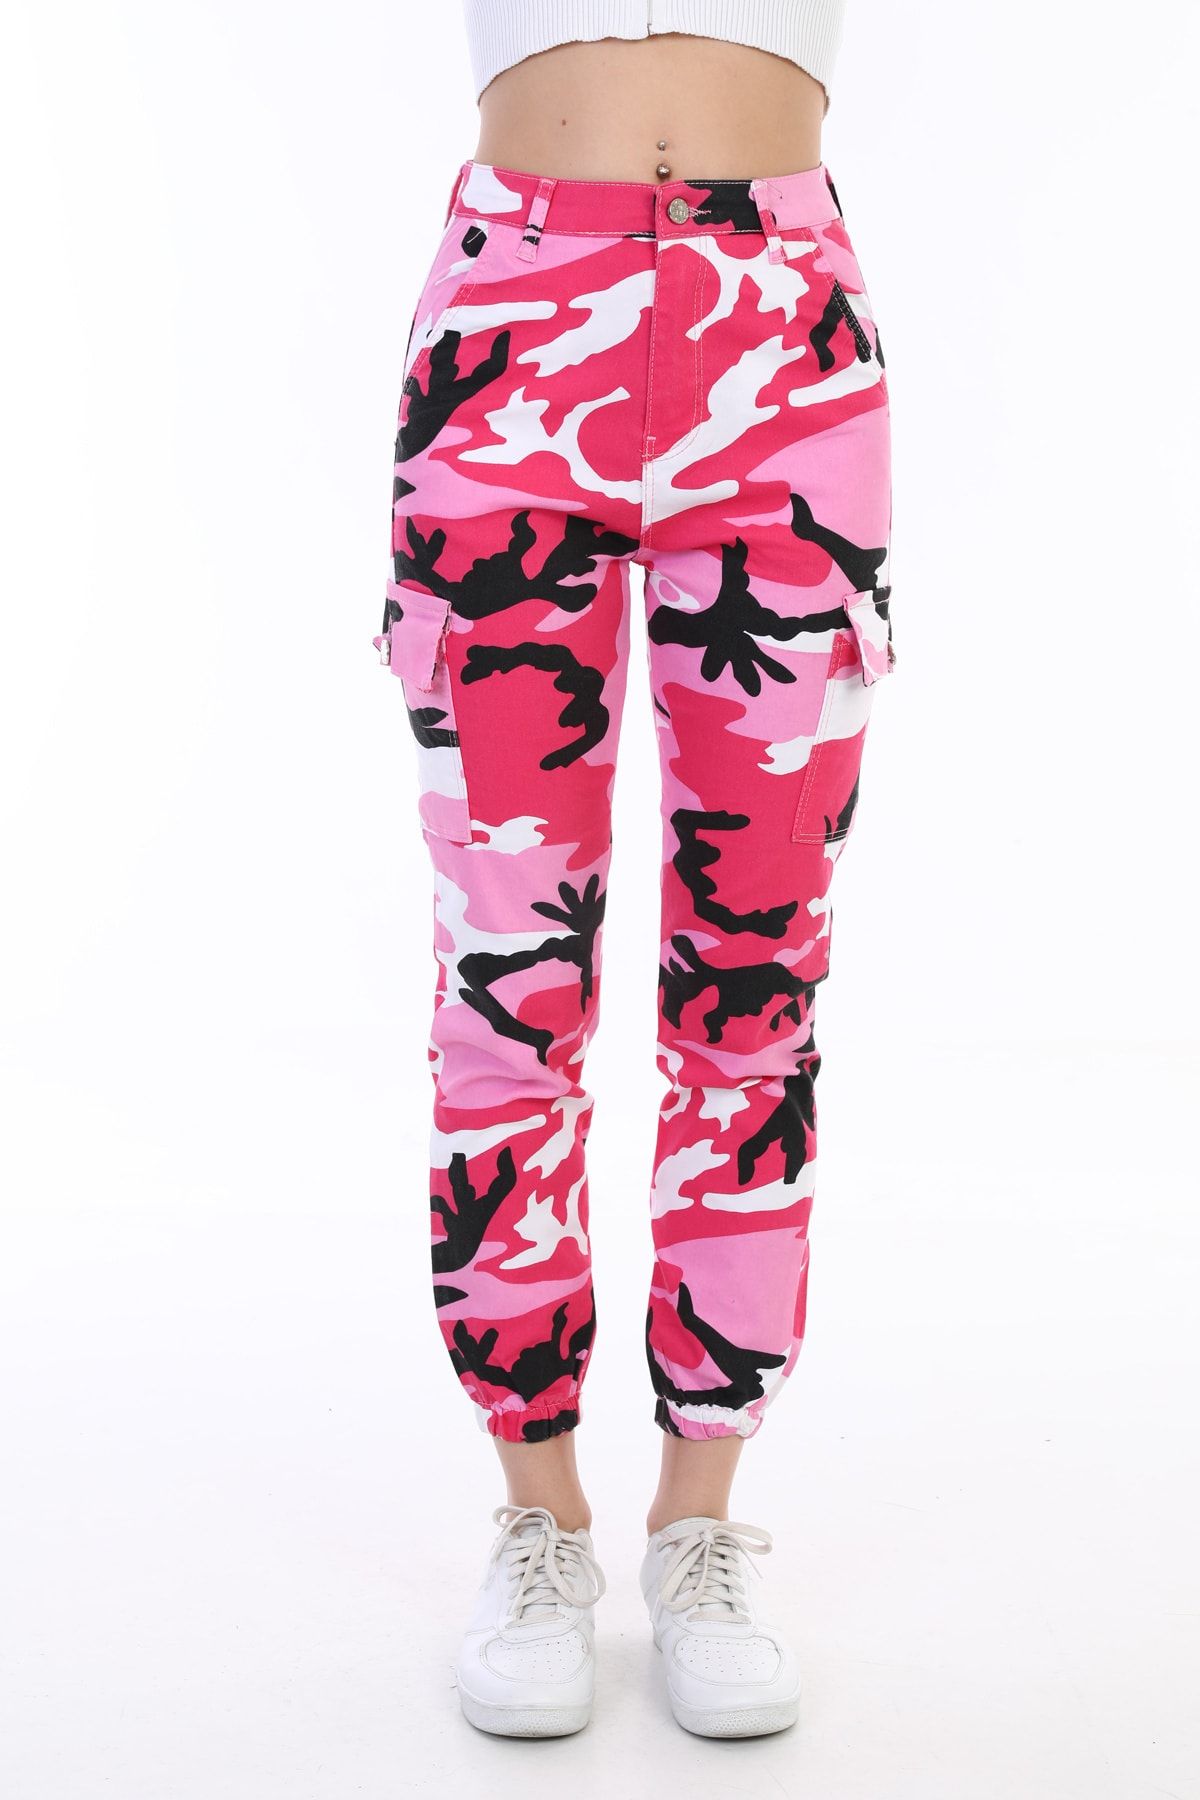 BİKELİFE Pink Camouflage Pattern Gabardine Trousers with Cargo Pockets